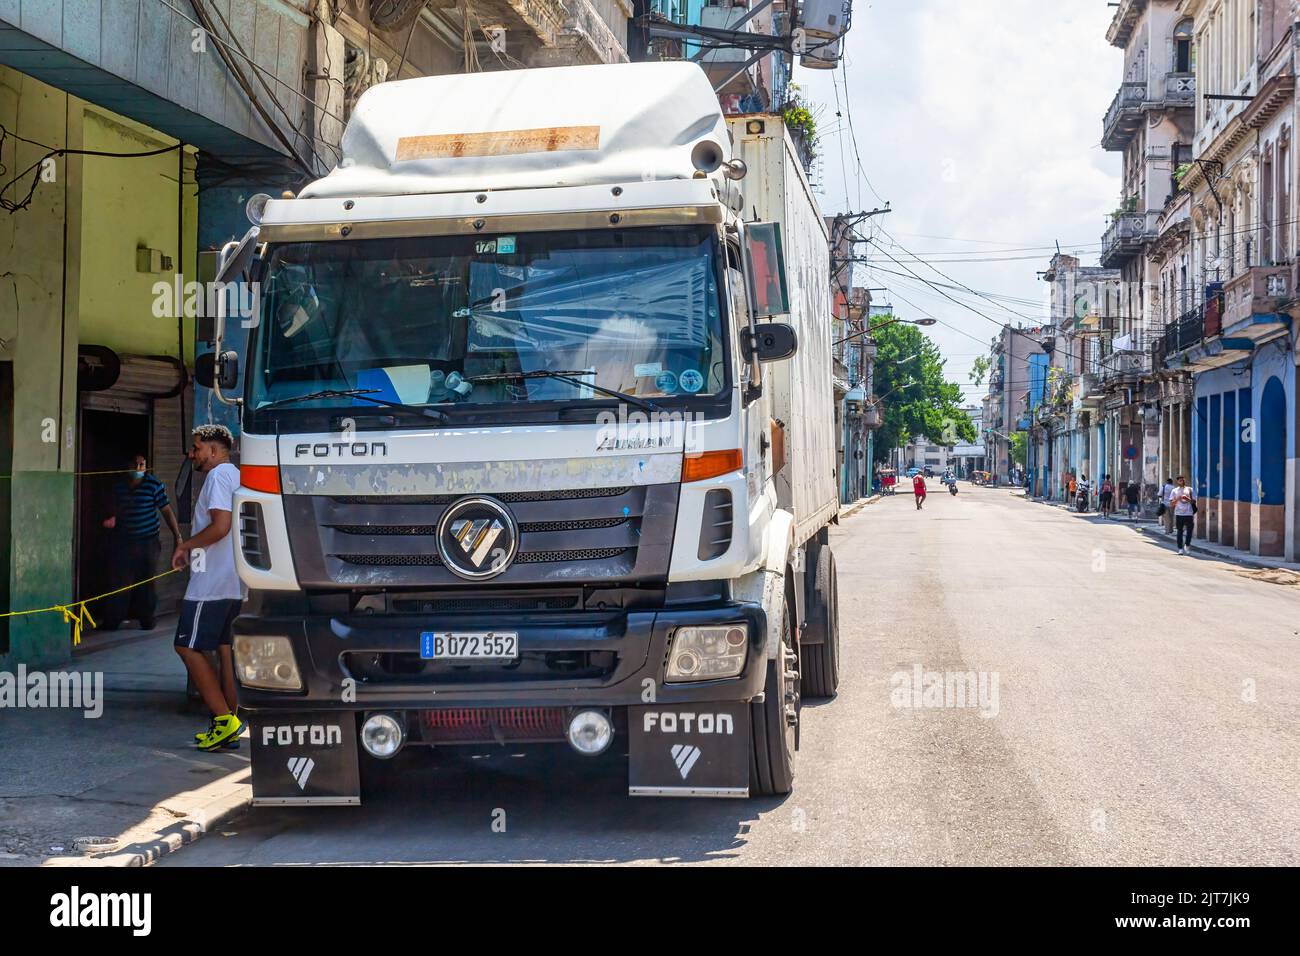 A Foton truck is parked in a city street. A business has a small rope in the porch signaling that people cannot enter. Stock Photo